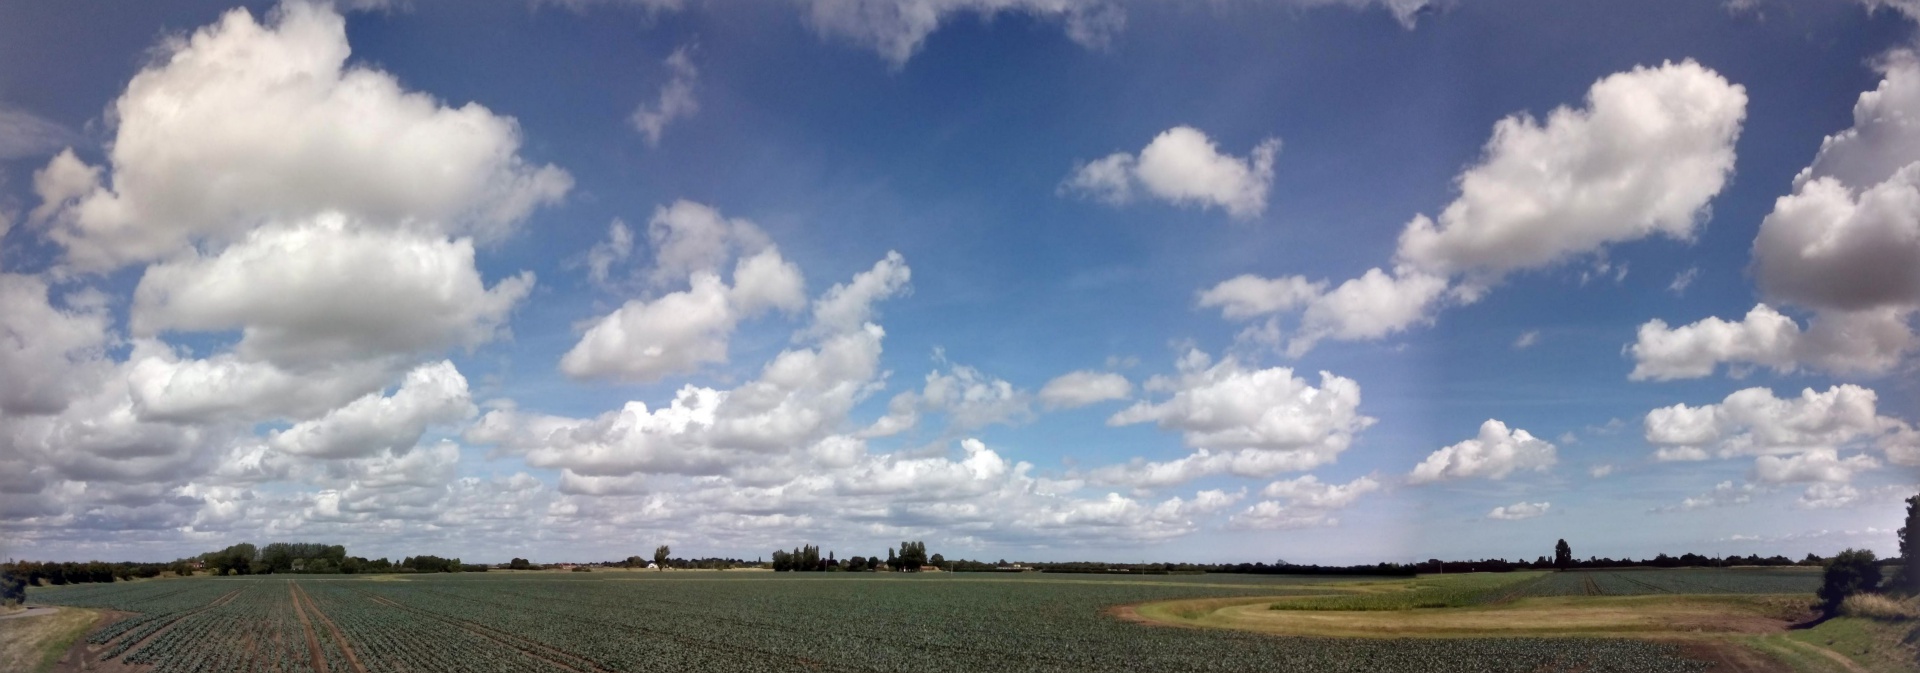 Select this image to see a larger version. IMG 20150801T124223
Lincolnshire's Big Sky